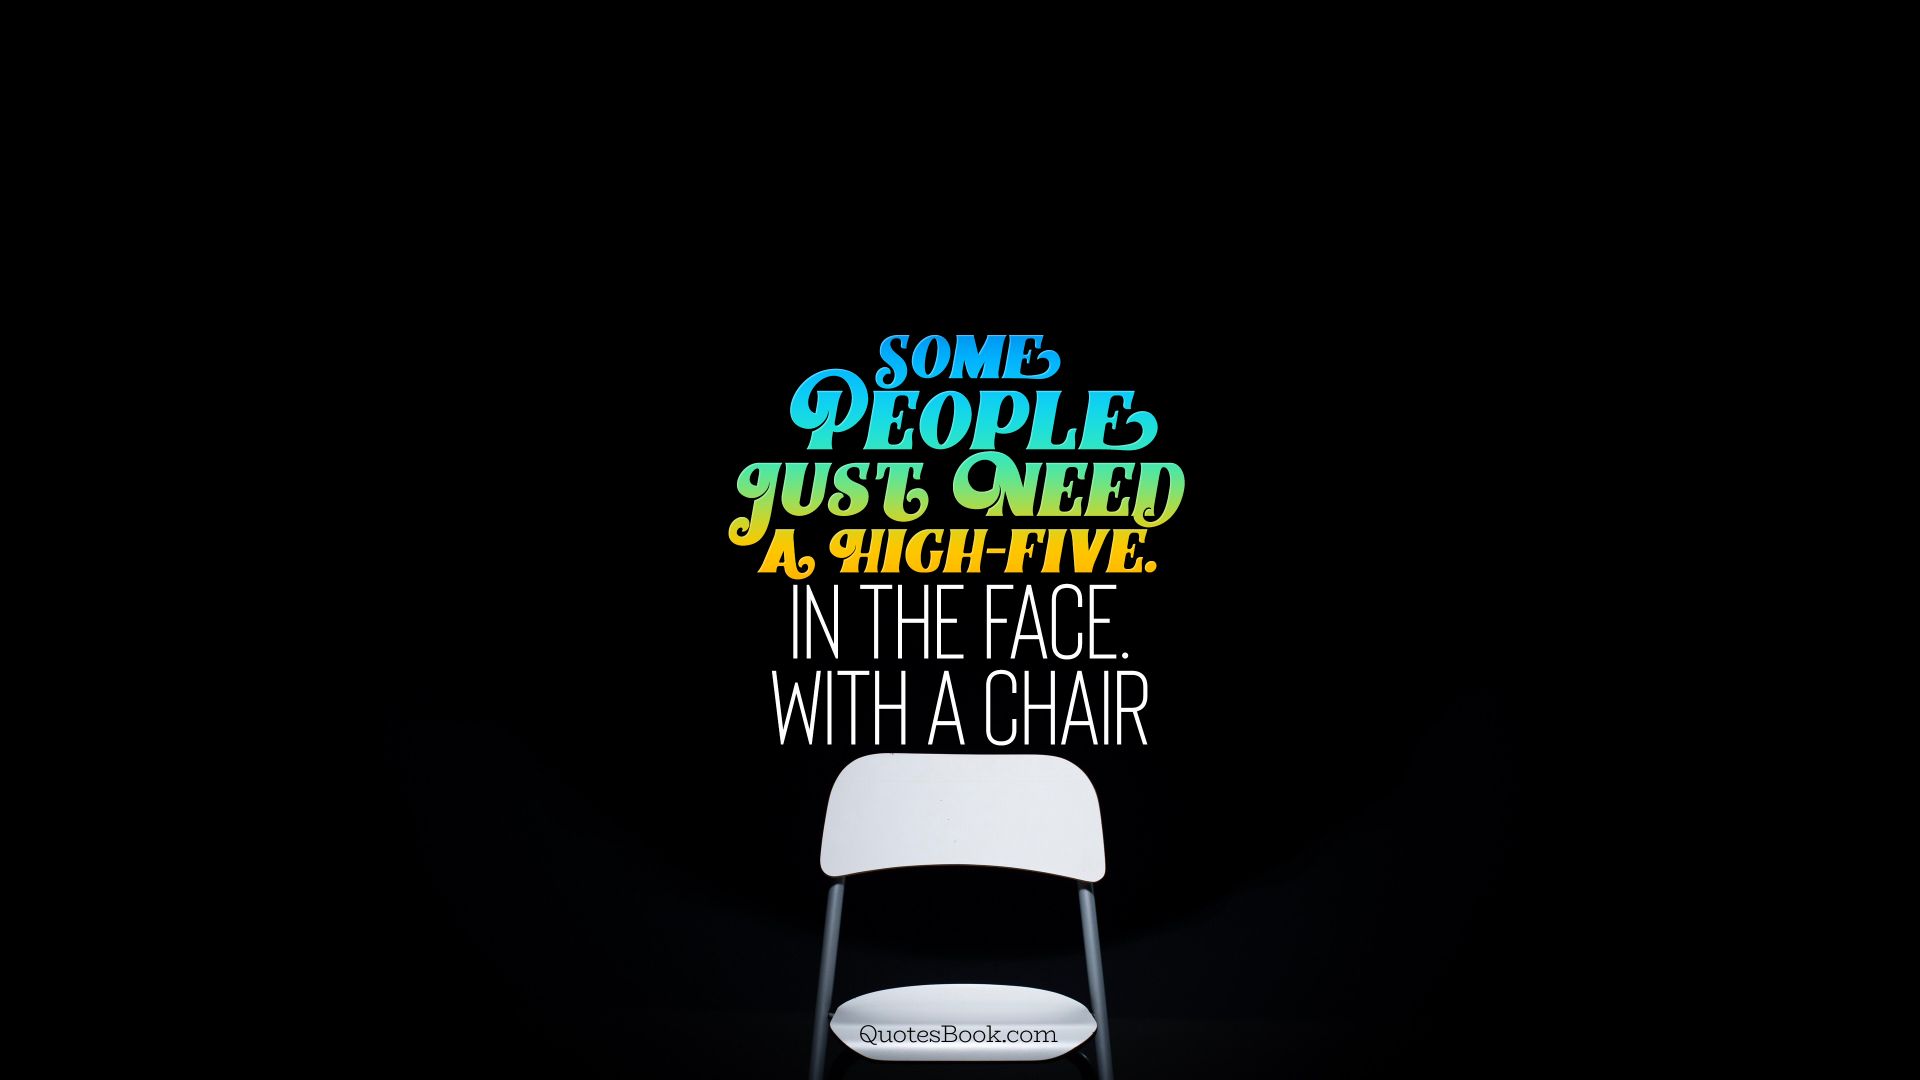 Some people just need a high-five. In the face. With a chair